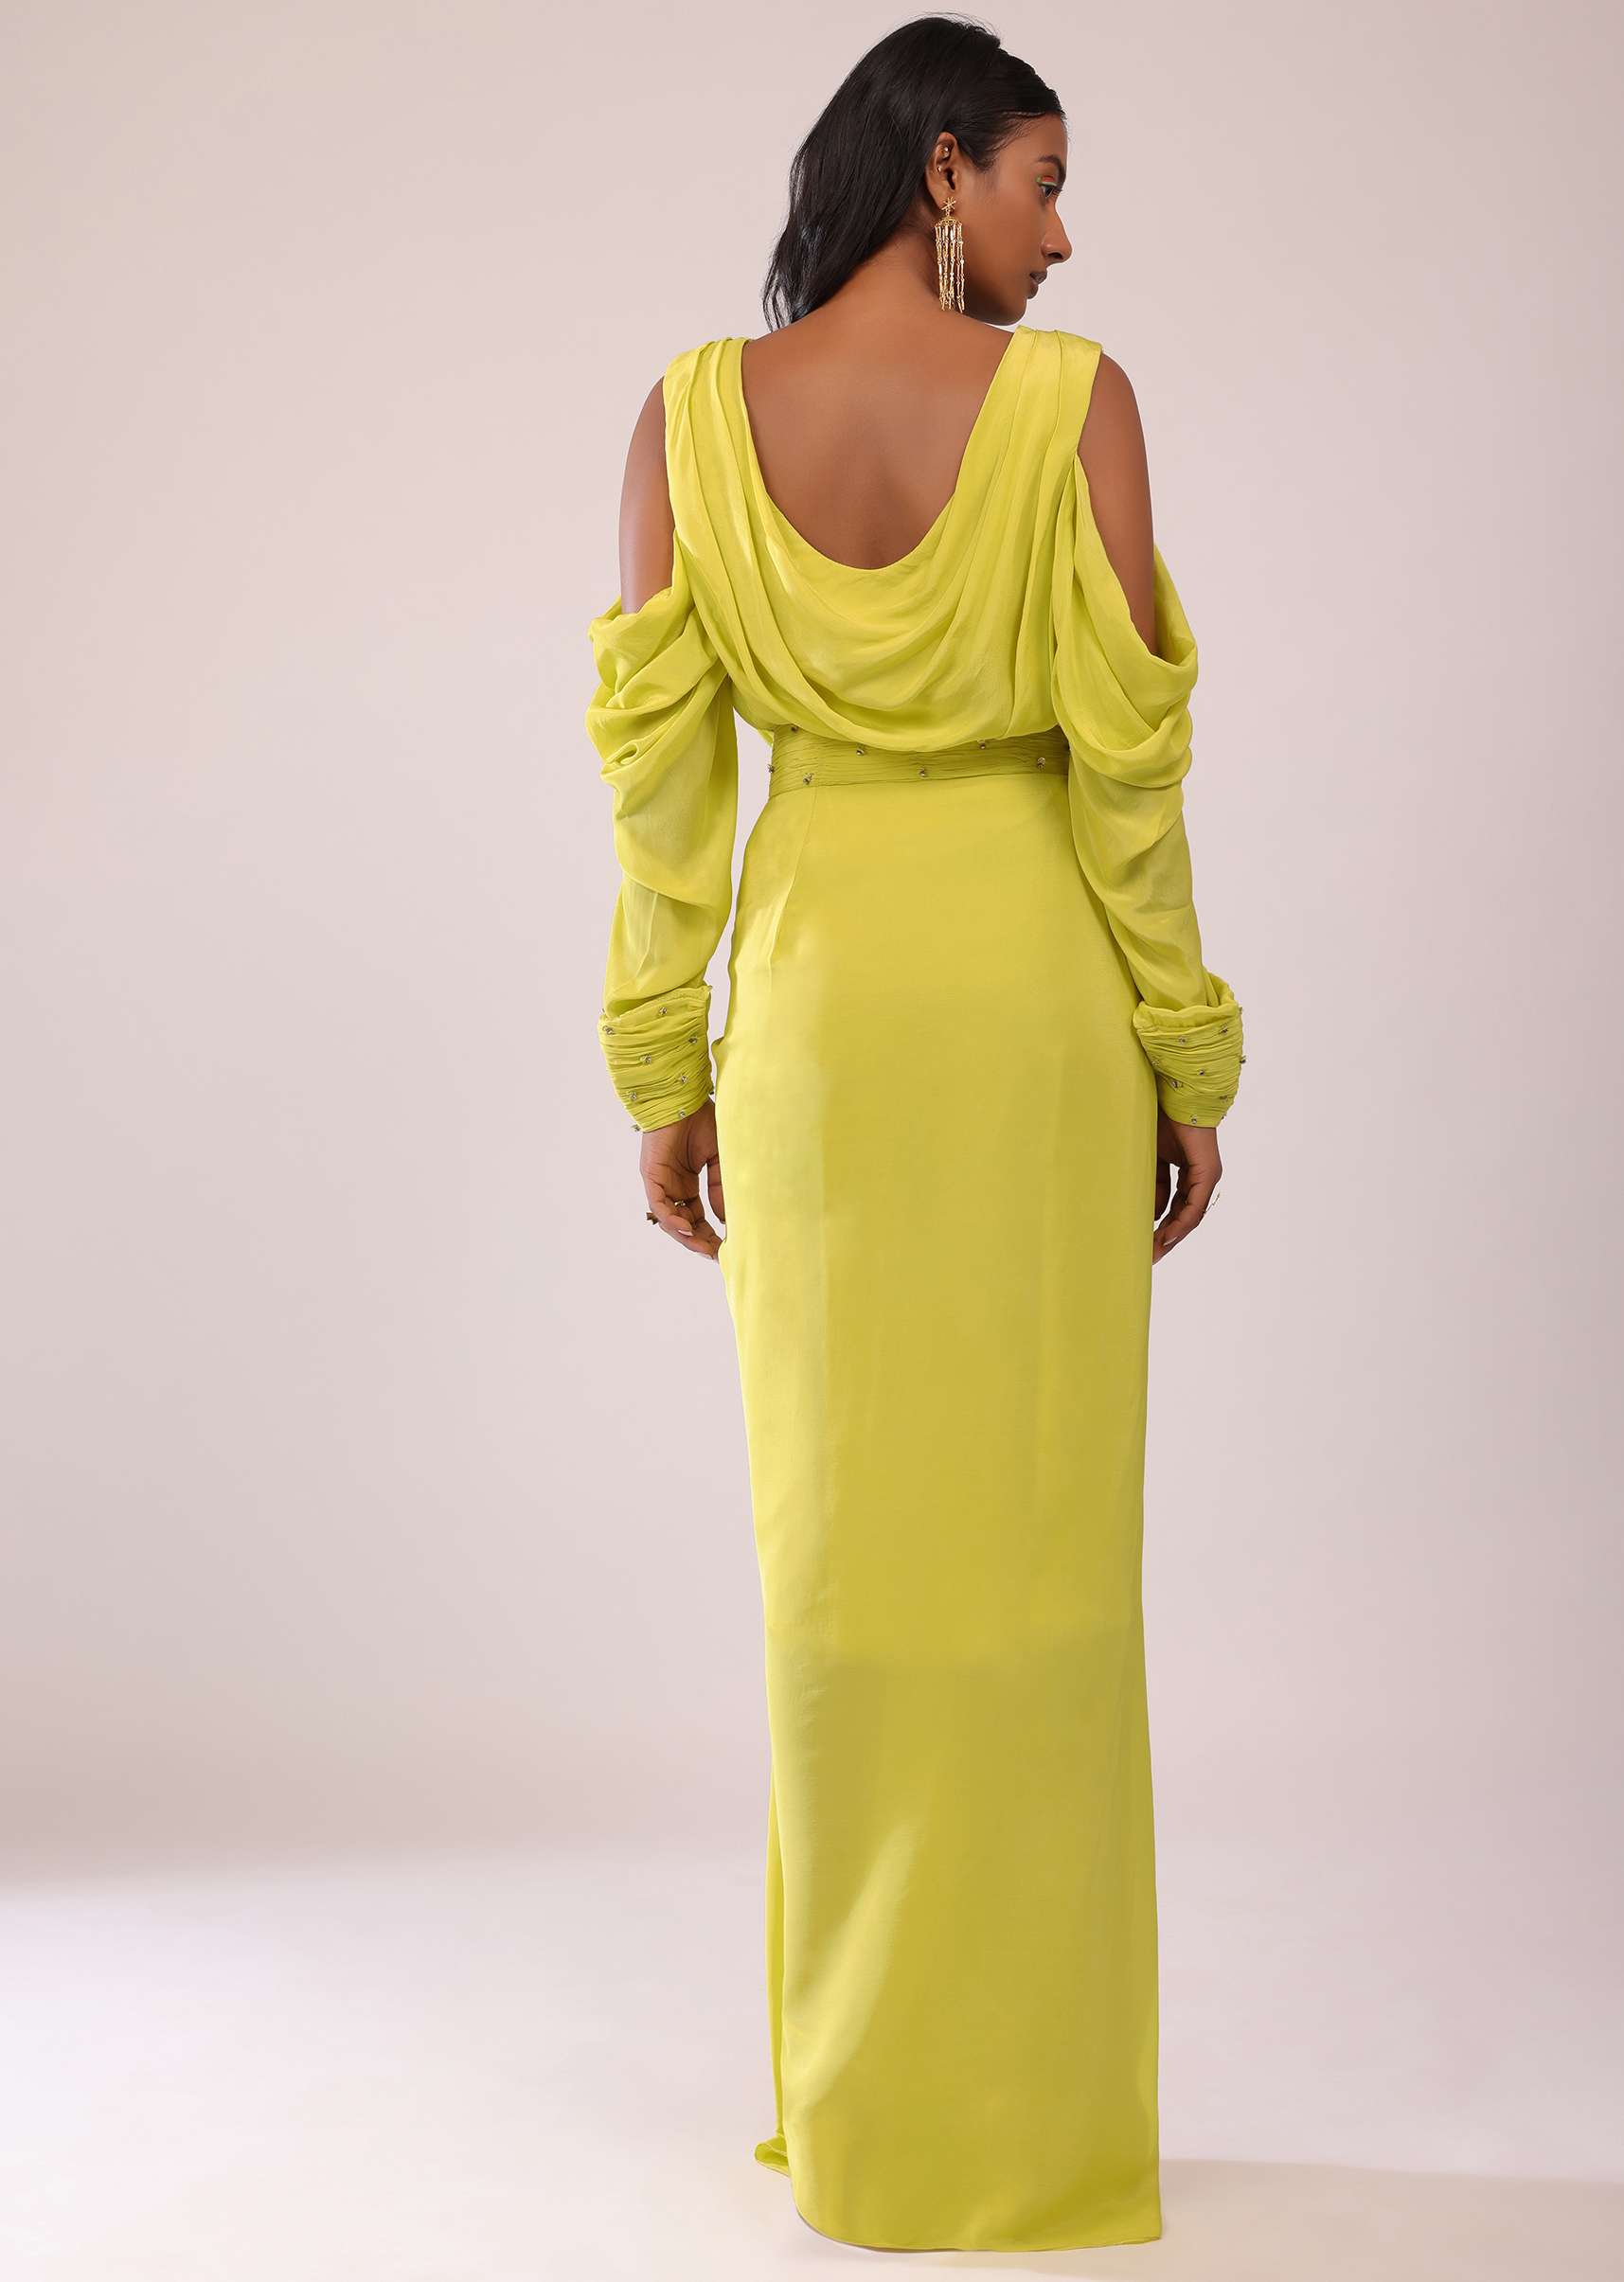 Sheen Green Cowl Top And Drape Skirt In Crepe